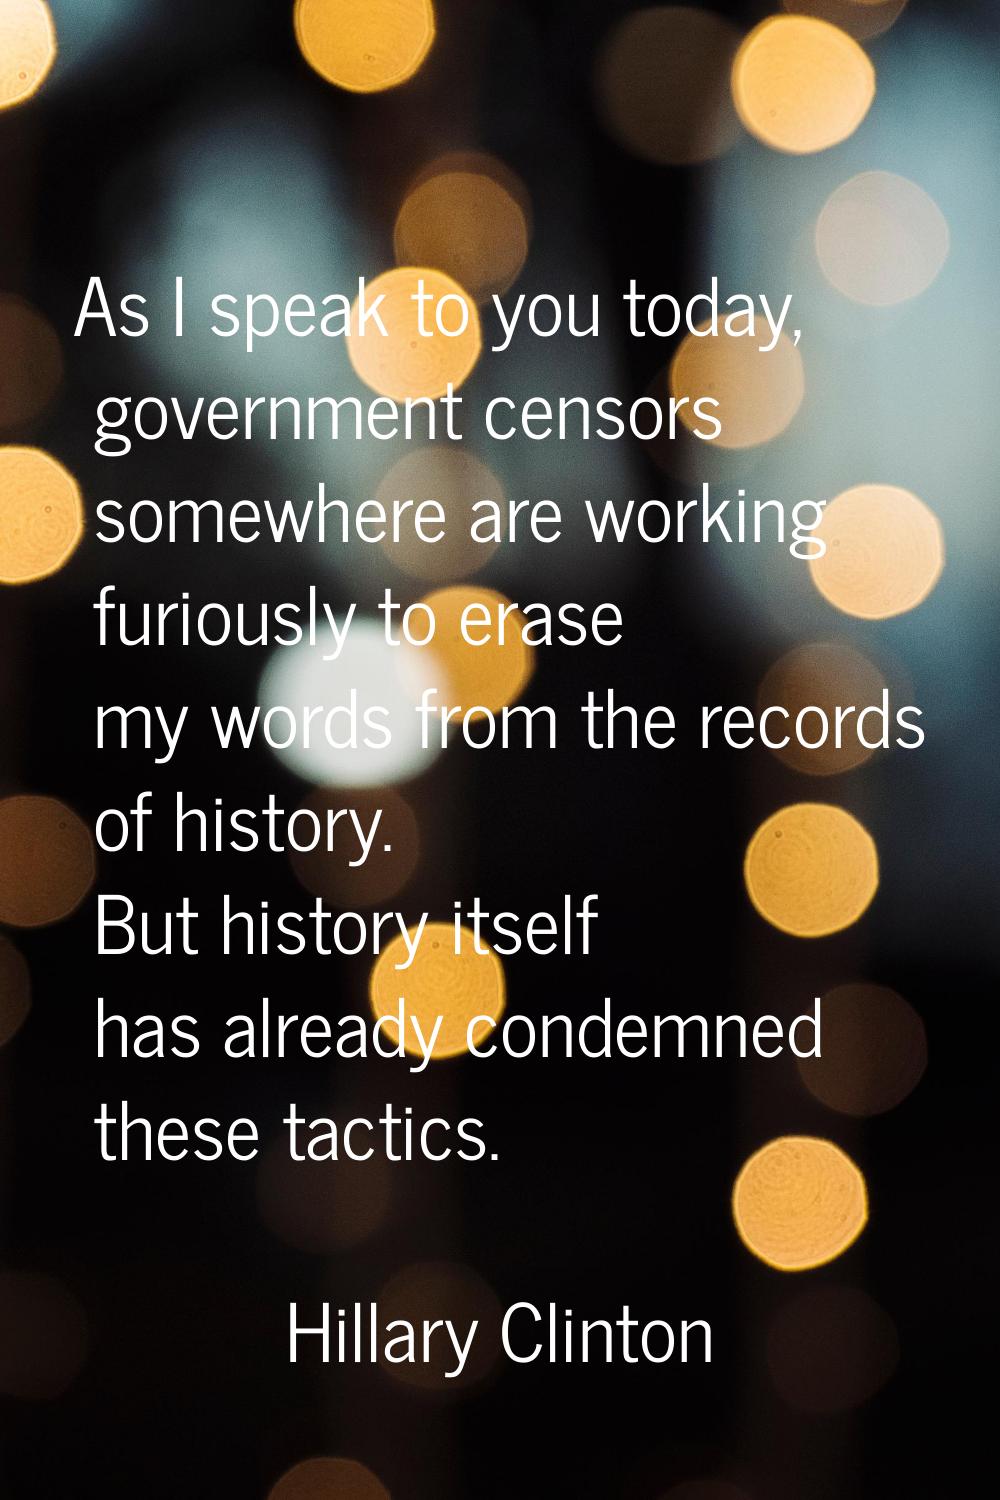 As I speak to you today, government censors somewhere are working furiously to erase my words from 